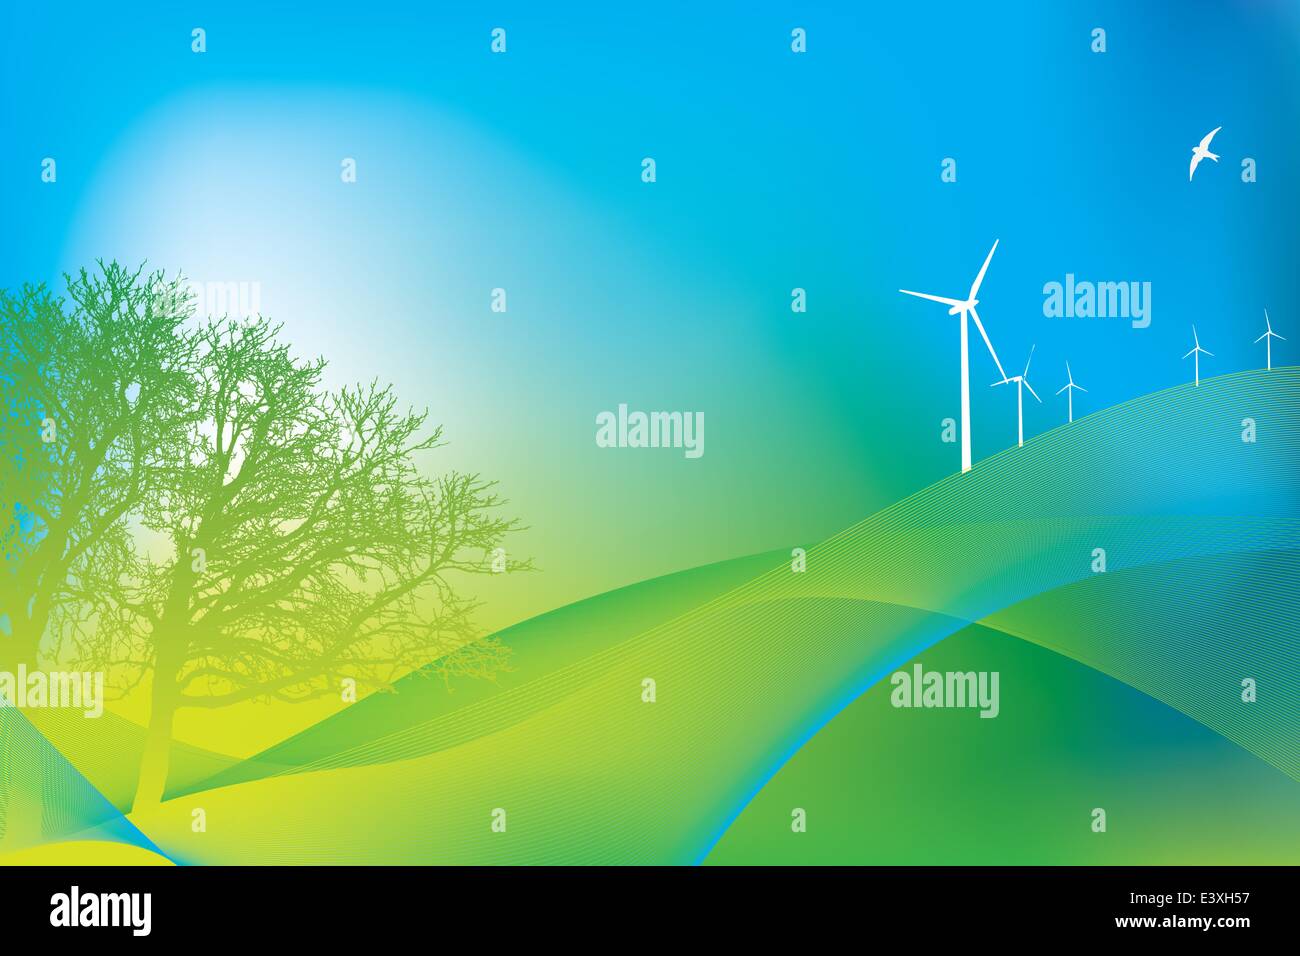 Illustration of  3 wind turbines and oak tree in eco design Stock Vector